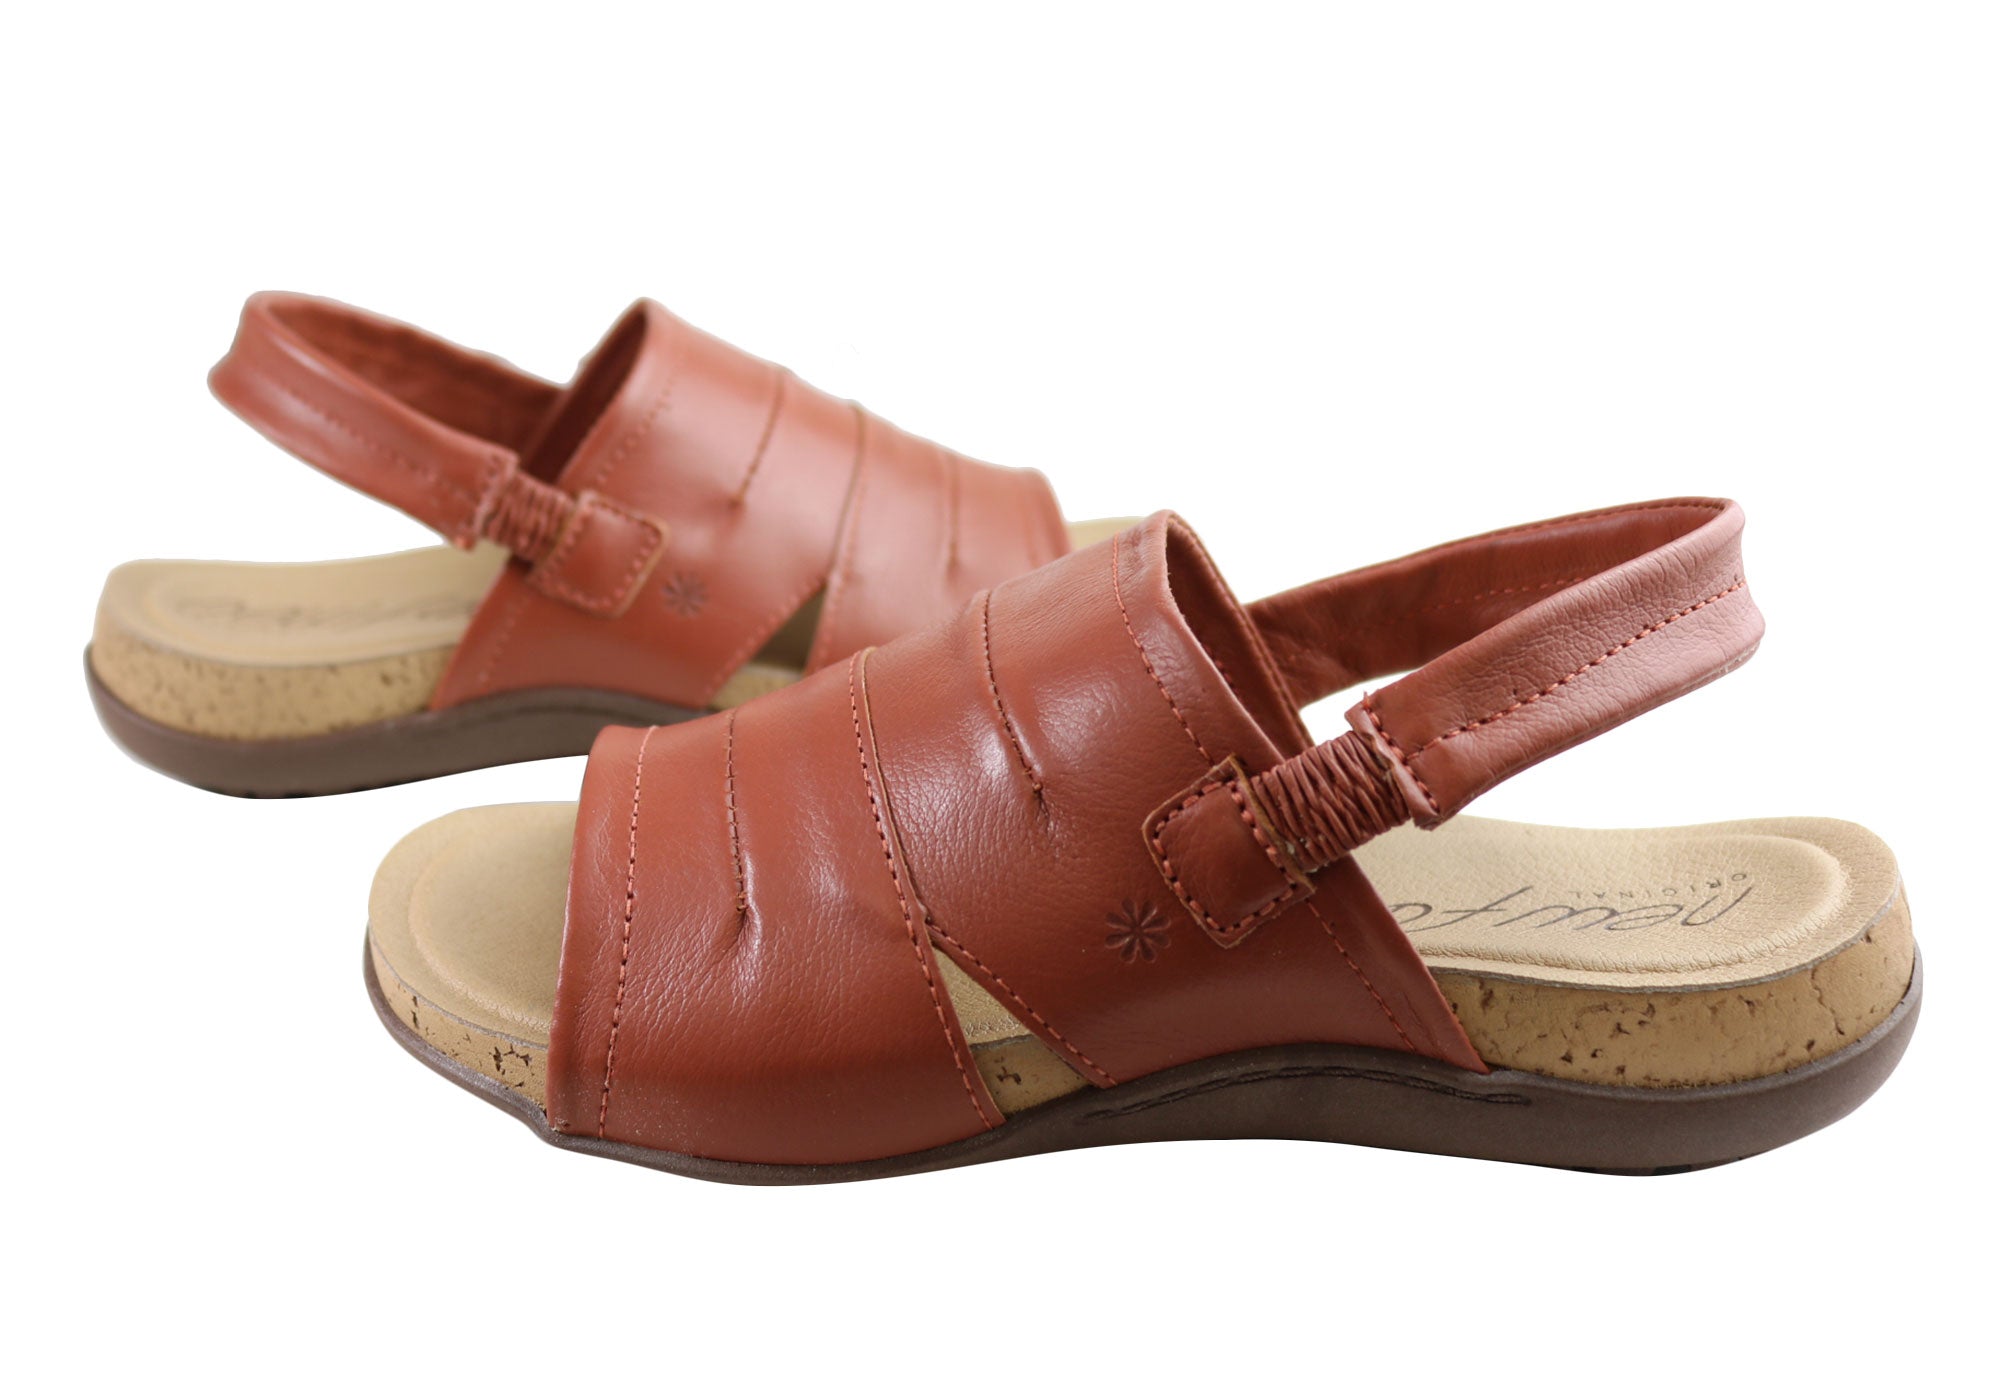 New Face Habour Womens Comfortable Leather Sandals Made In Brazil